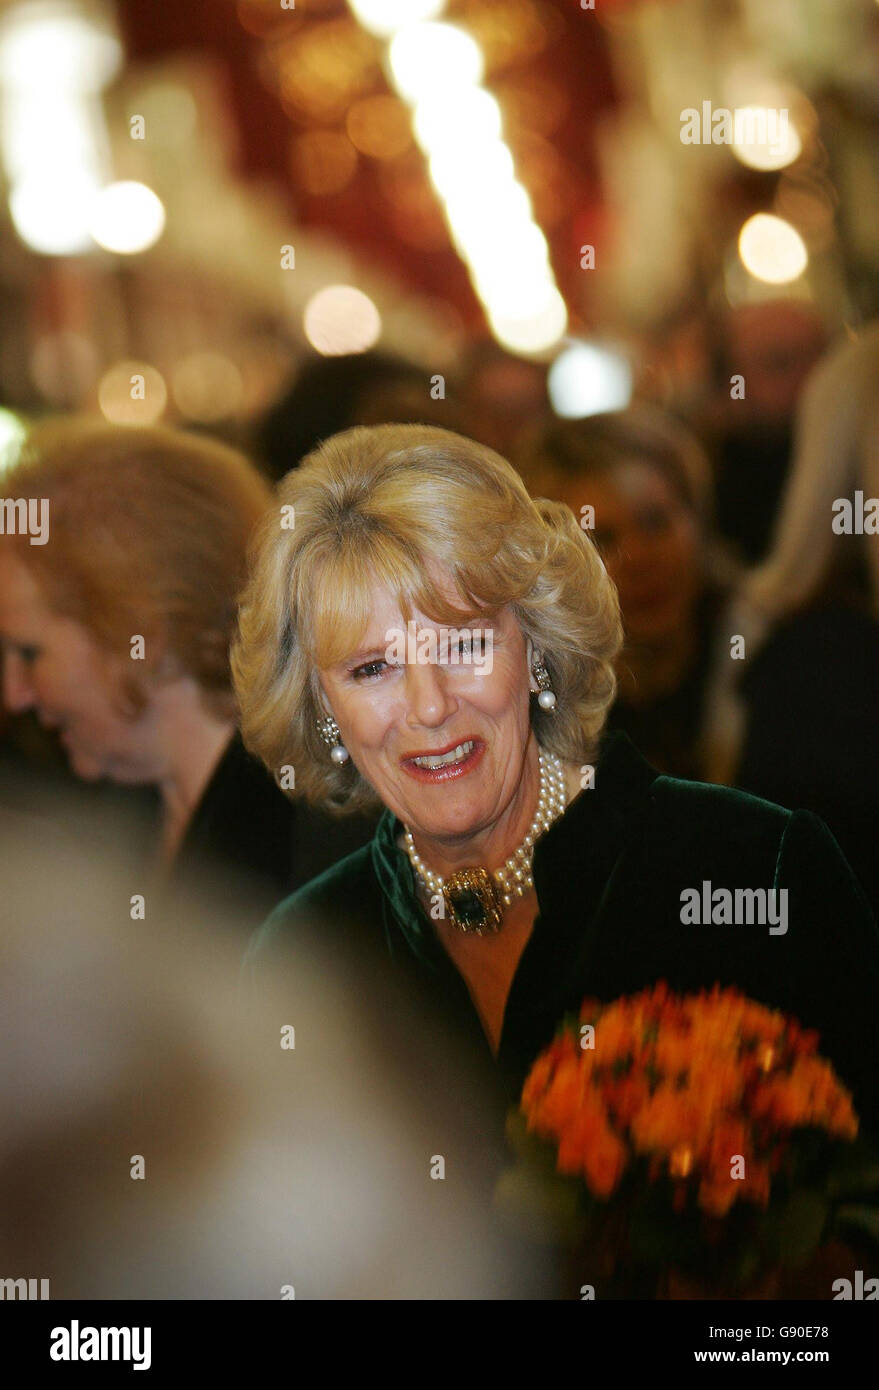 The Duchess of Cornwall during a visit to the Burlington Arcade in central London, Thursday November 17, 2005, where she switched on the Christmas lights. Camilla met shop owners and staff as they enjoyed mince pies and mulled wine in the covered arcade, which describes itself as 'the height of stylish shopping in the heart of London's West End' and 'the most elegant shopping arcade in London'. See PA Story ROYAL Camilla. PRESS ASSOCIATION Photo. Photo credit should read: Adrian Dennis/PA/WPA Rota AFP. Stock Photo